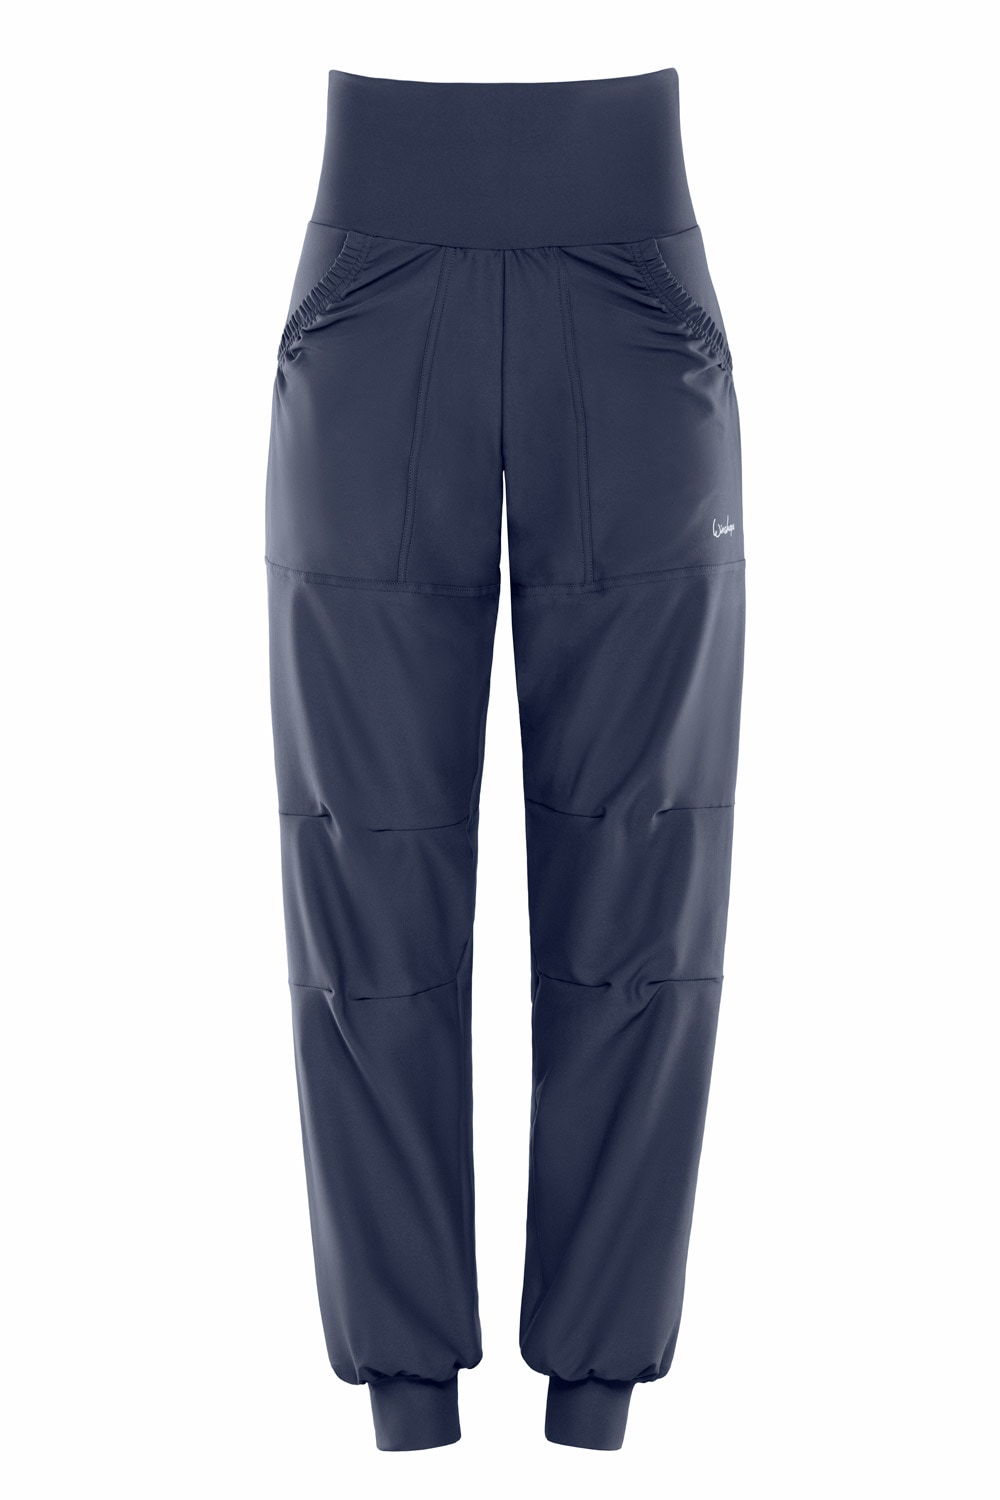 Winshape Sporthose »Functional Comfort LEI101C«, High bei Time Leisure Waist Trousers OTTO online